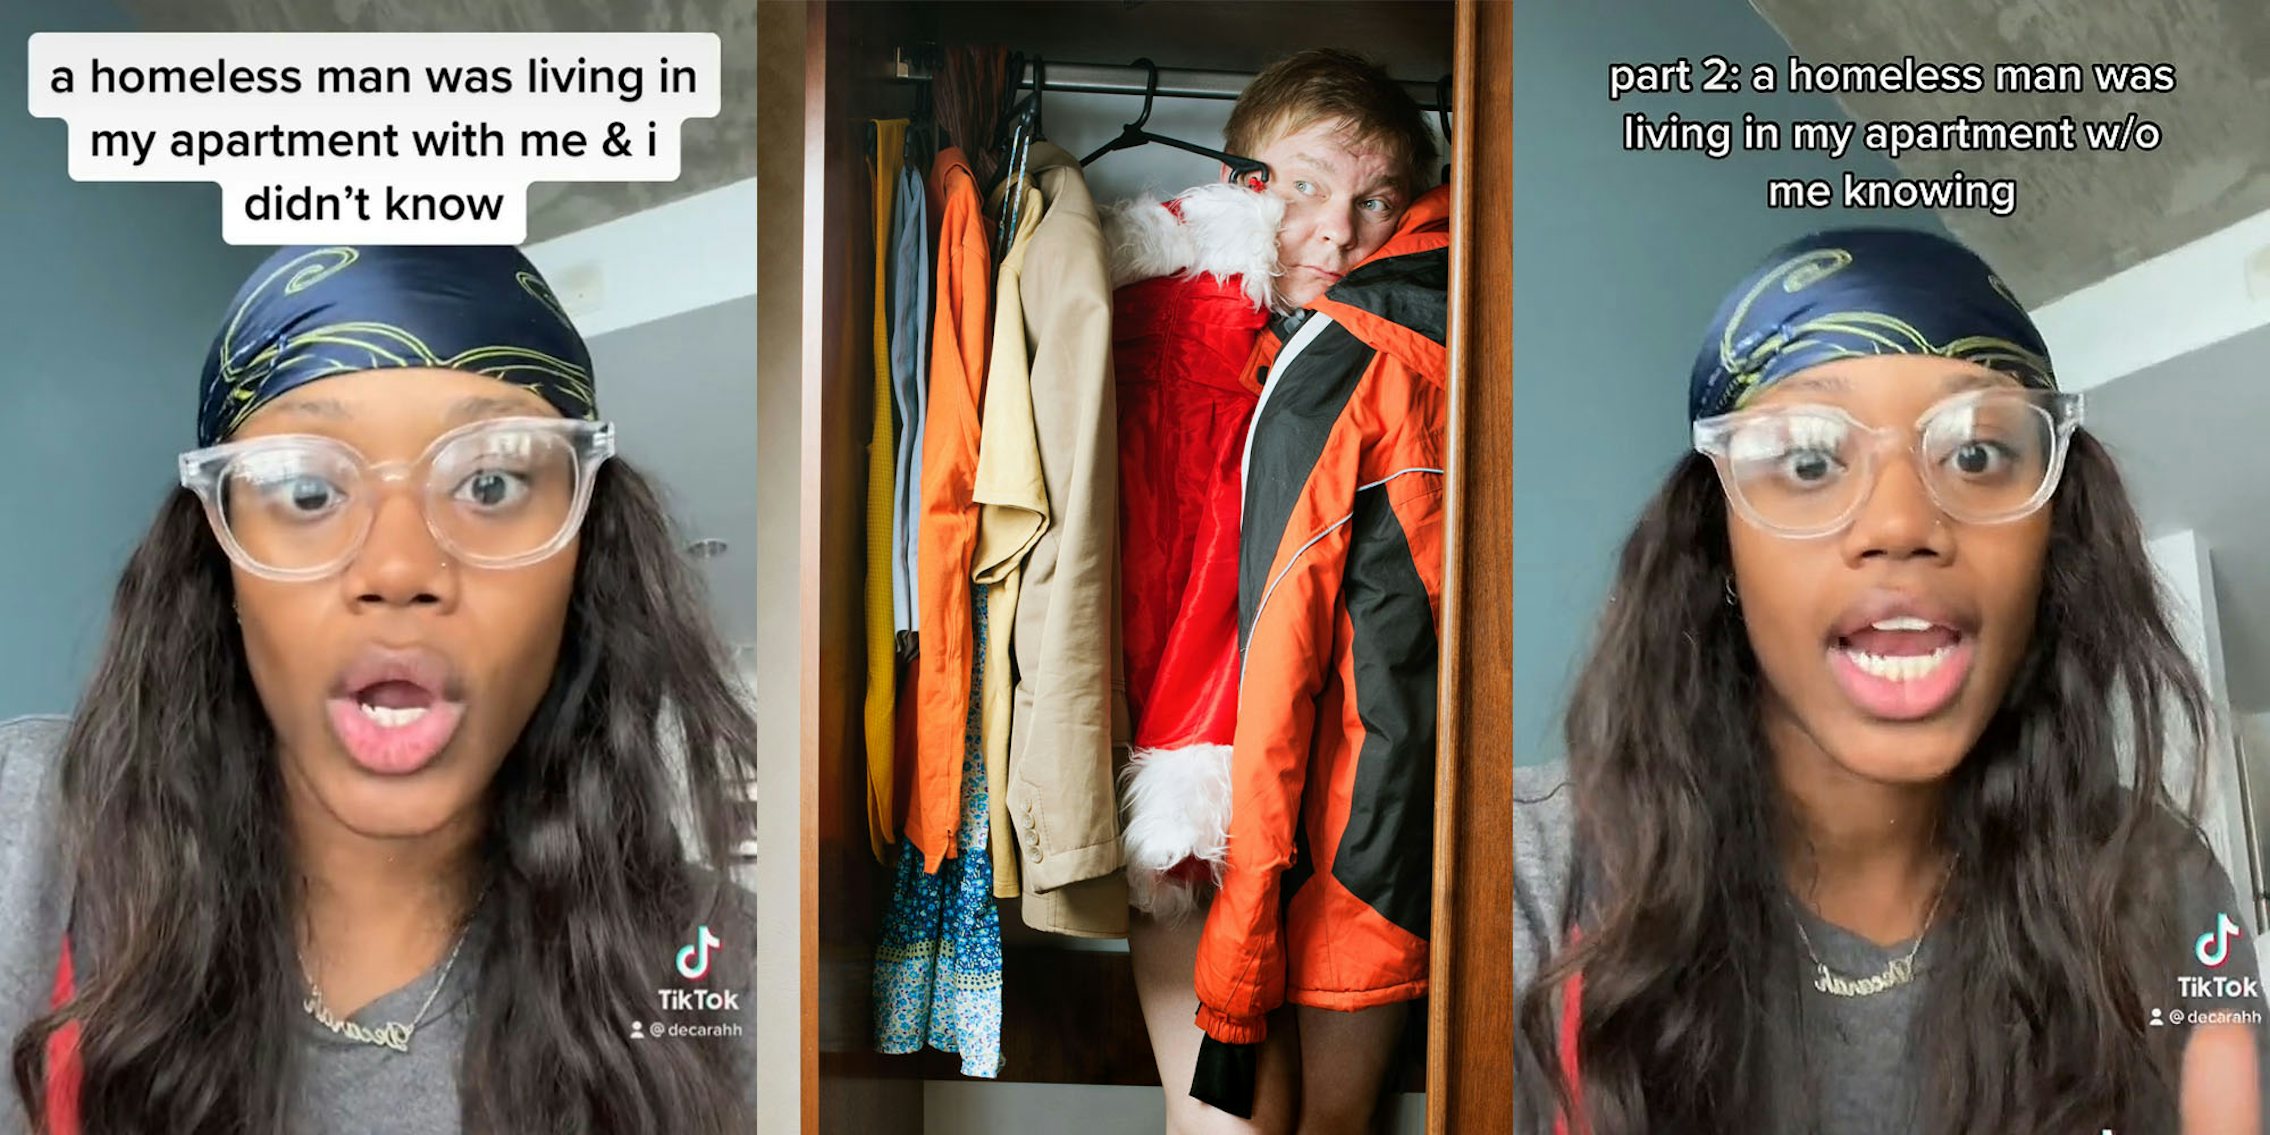 woman speaking caption 'a homeless man was living in my apartment with me & i didn't know' (l) man in closet poking head out (c) woman speaking caption 'part:2 a homeless man was living in my apartment w/o me knowing' (r)